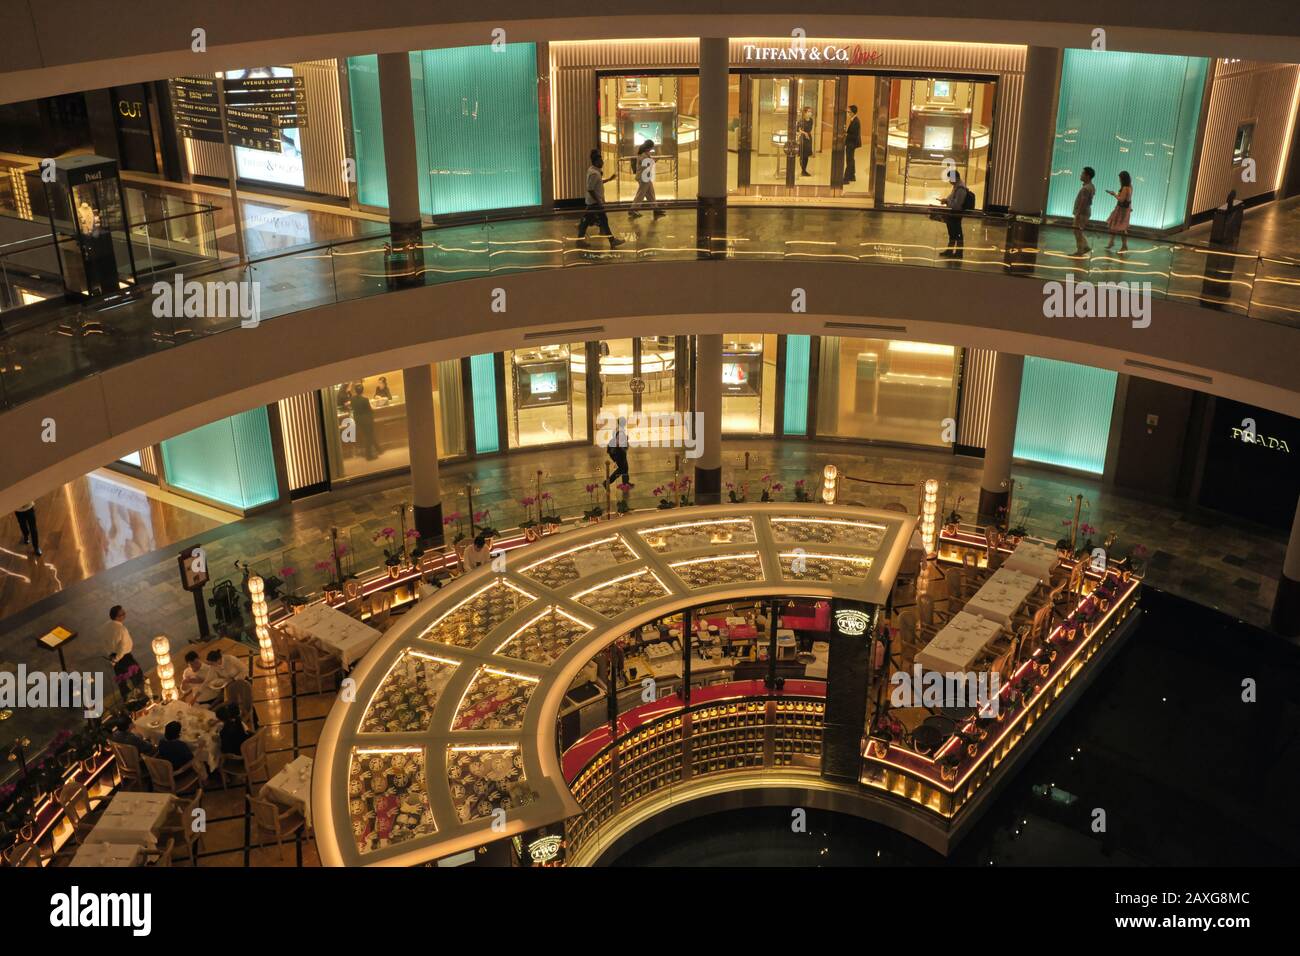 Inside The Shoppes at Marina Bay Sands, a luxury shopping mall attached to the iconic Marina Bay Sands Hotel; Marina Bay, Singapore Stock Photo